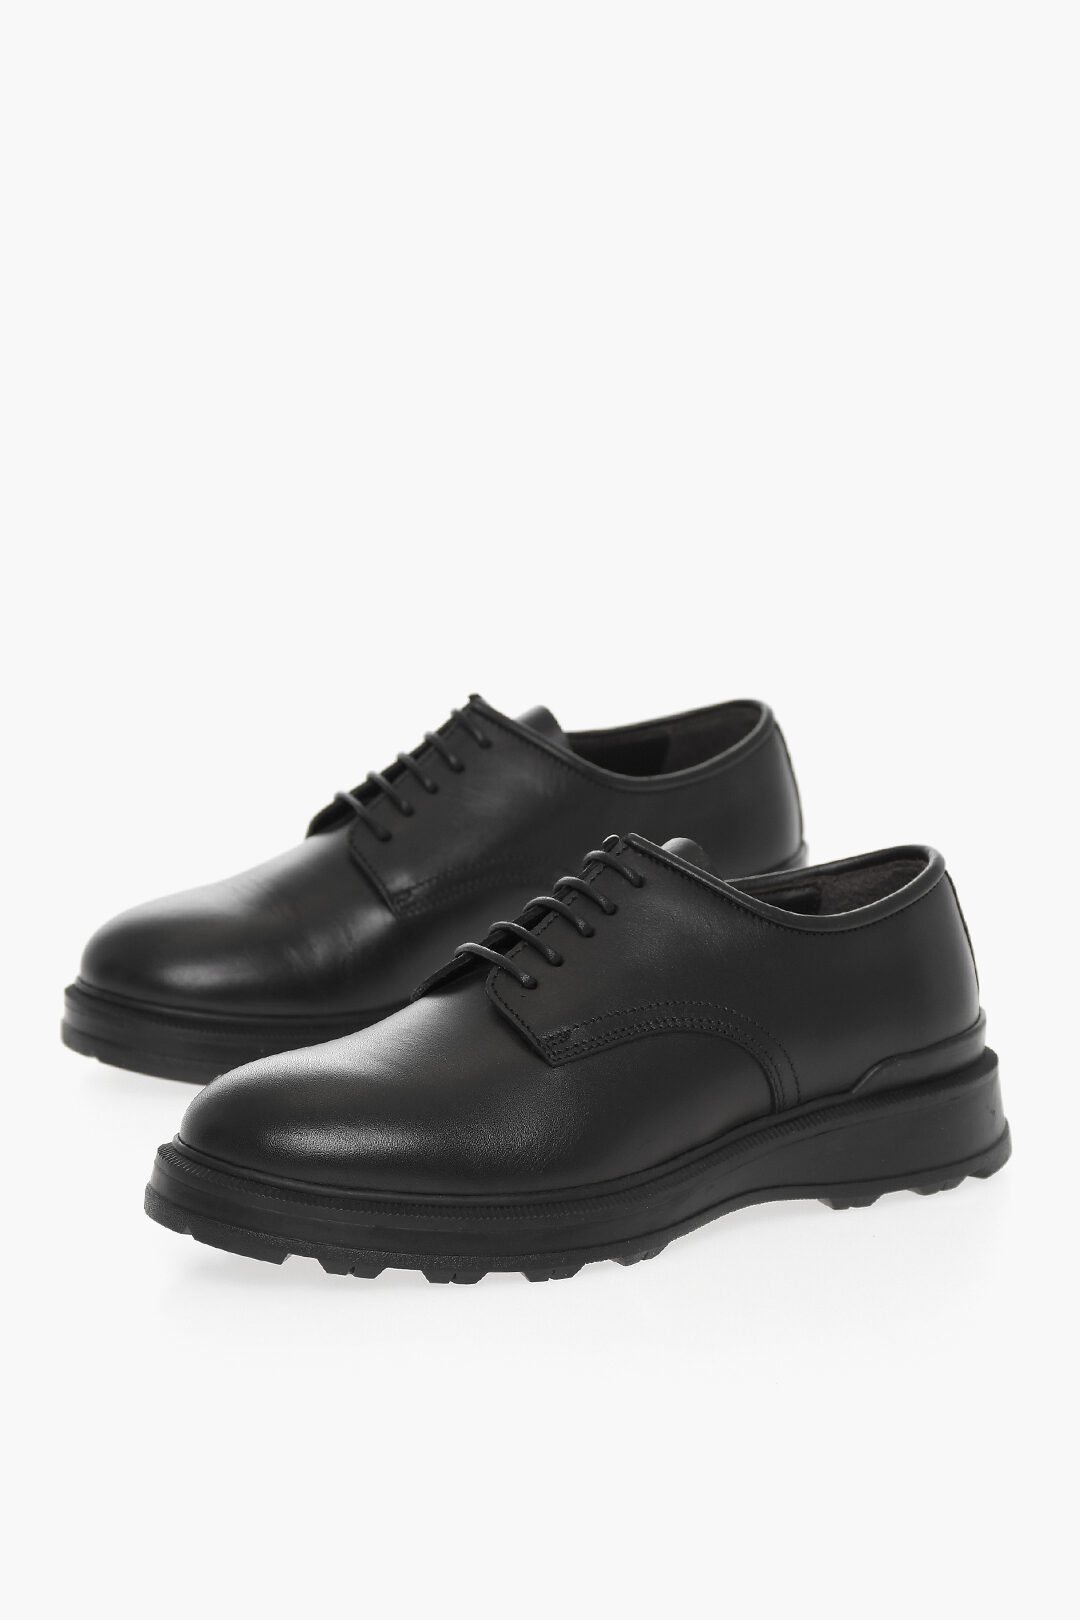 Woolrich Leather Derby Shoes men - Glamood Outlet